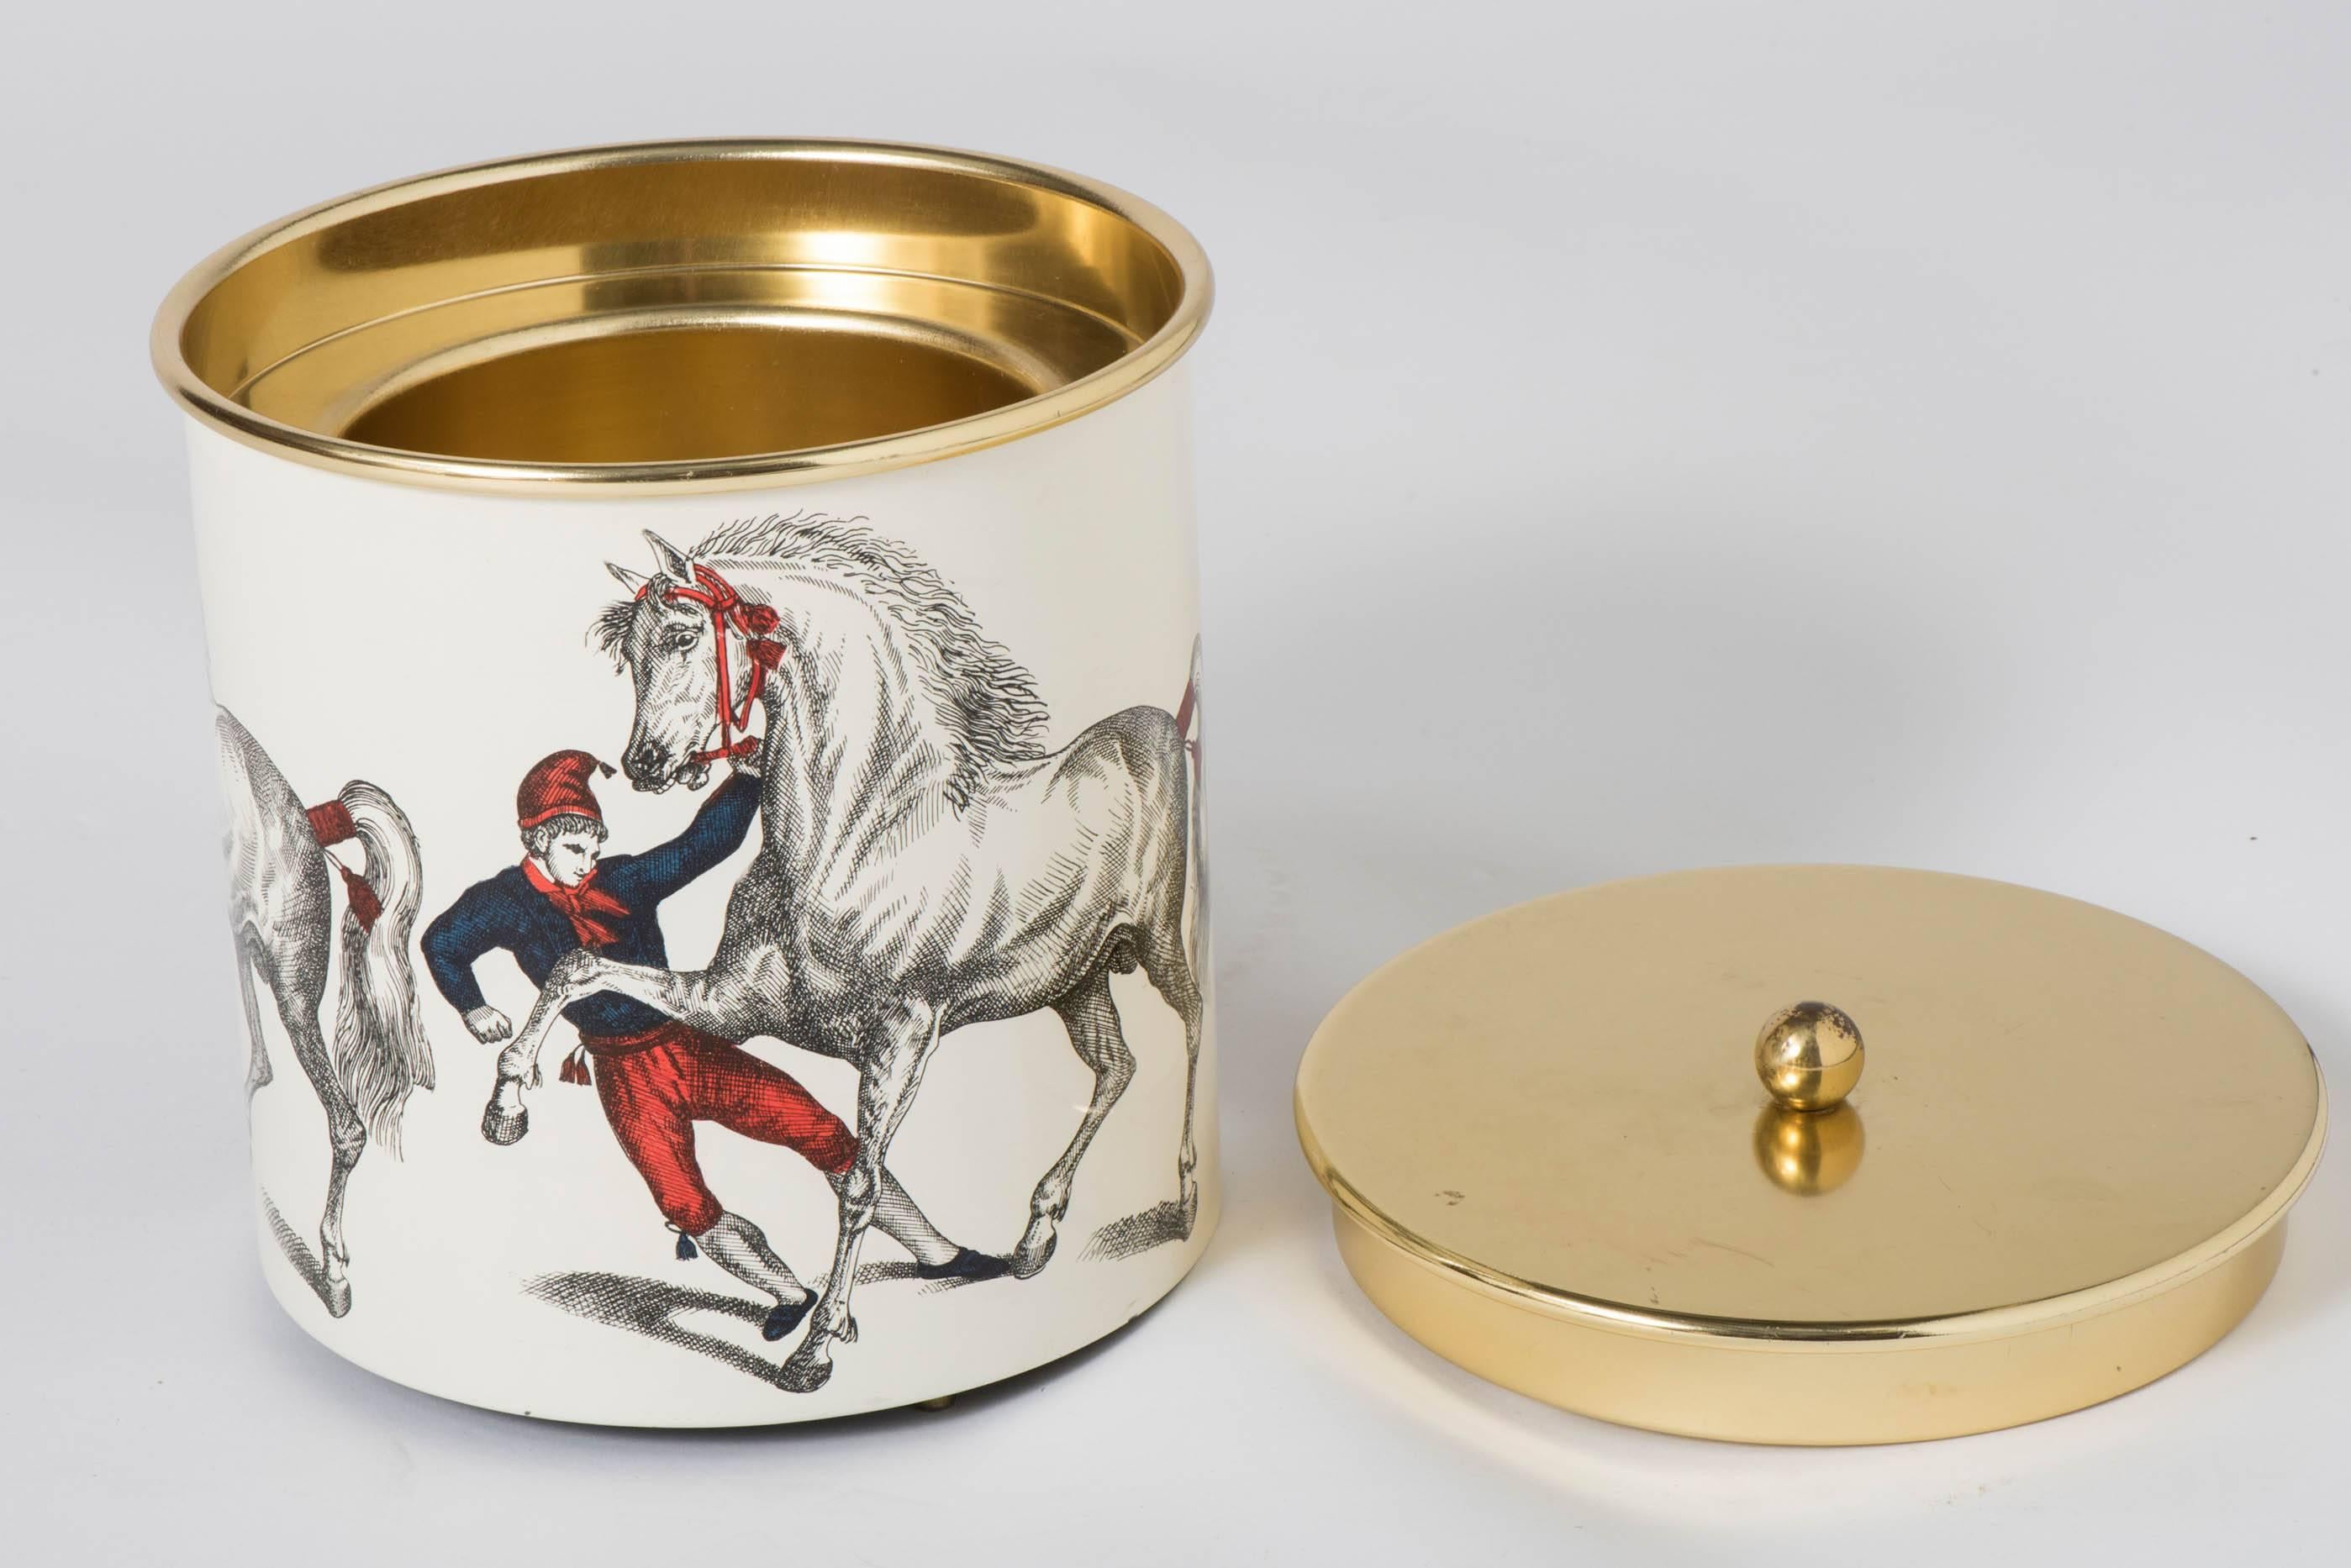 An early ice bucket by Piero Fornasetti.
“Cavalli Ramanti”
Rearing horse.
Lithographically printed and hand colored,
Metal and brass.
Italy, circa 1960.
  